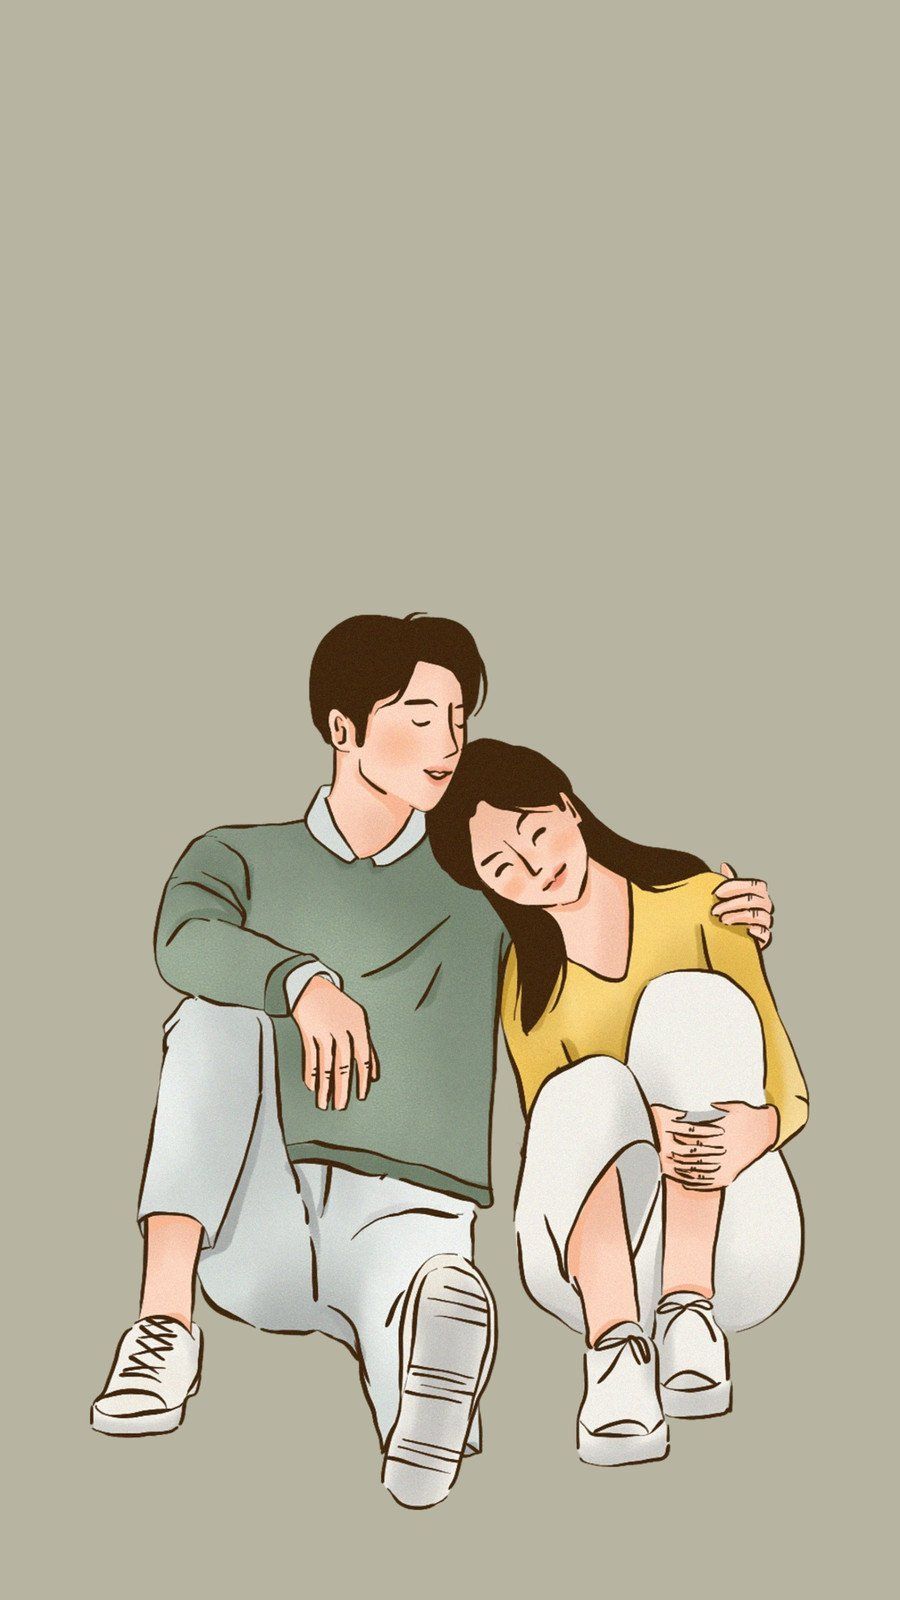 A man and woman sitting on the ground together - Illustration